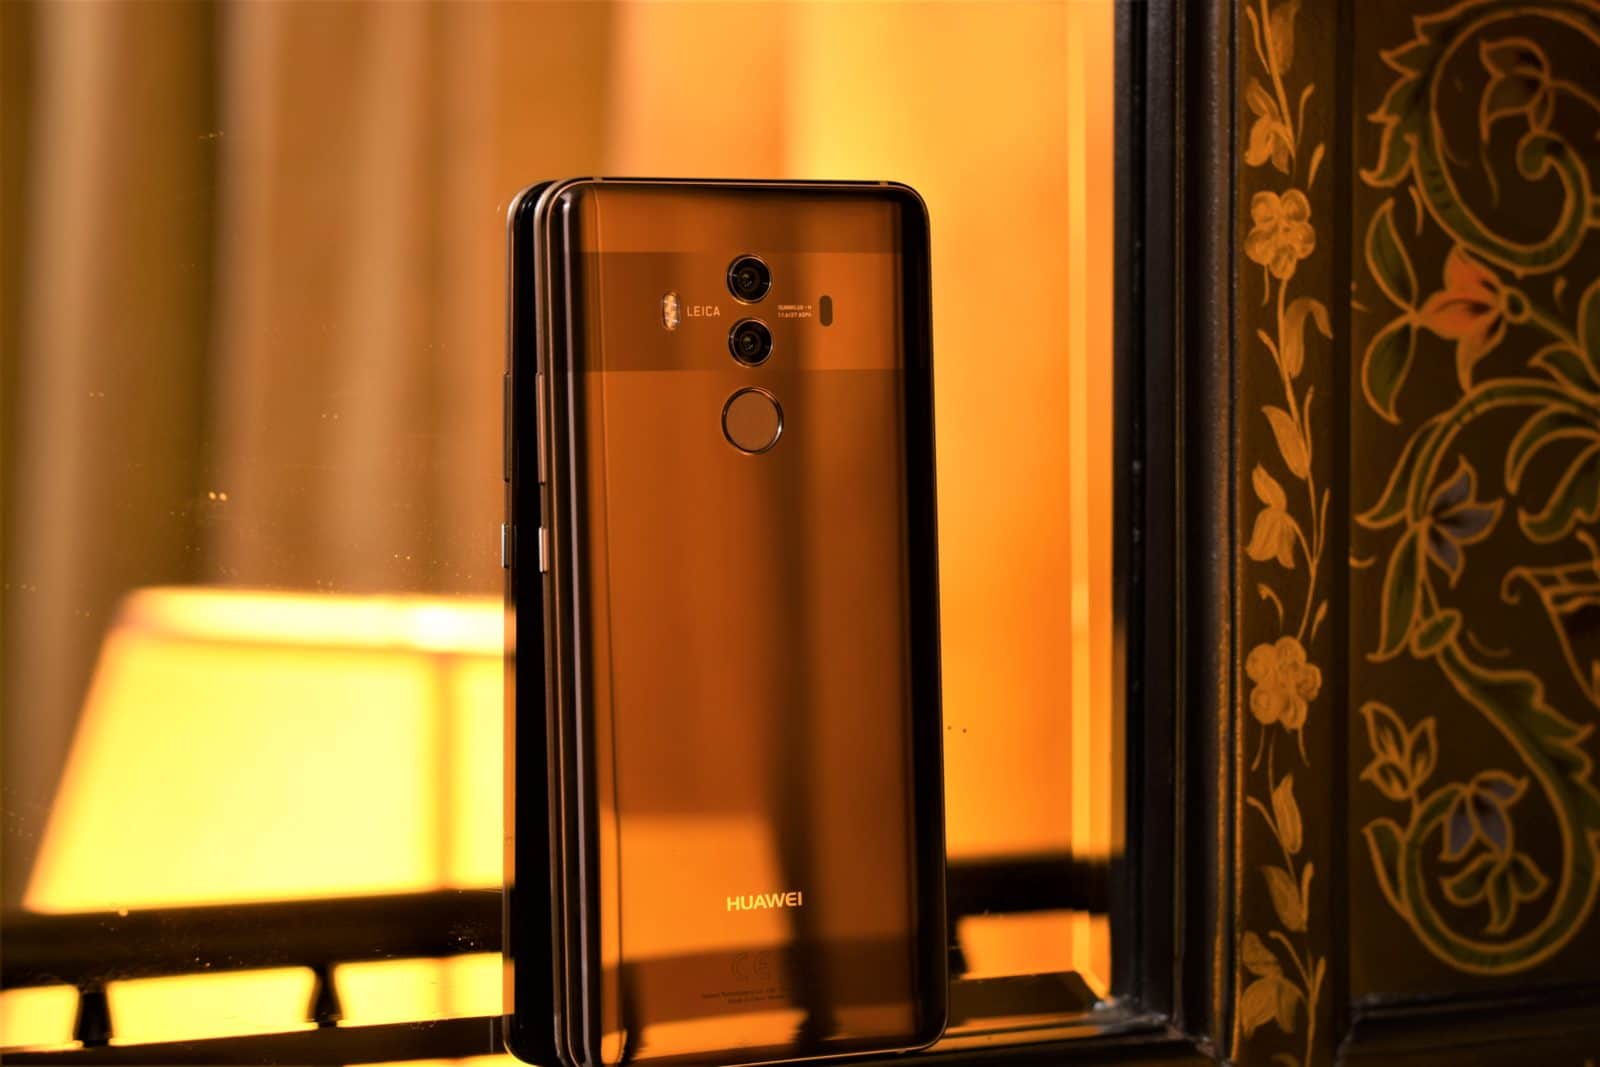 Huawei Mate 10 Pro: A Premium Flagship With Some Odd Omissions [Review]